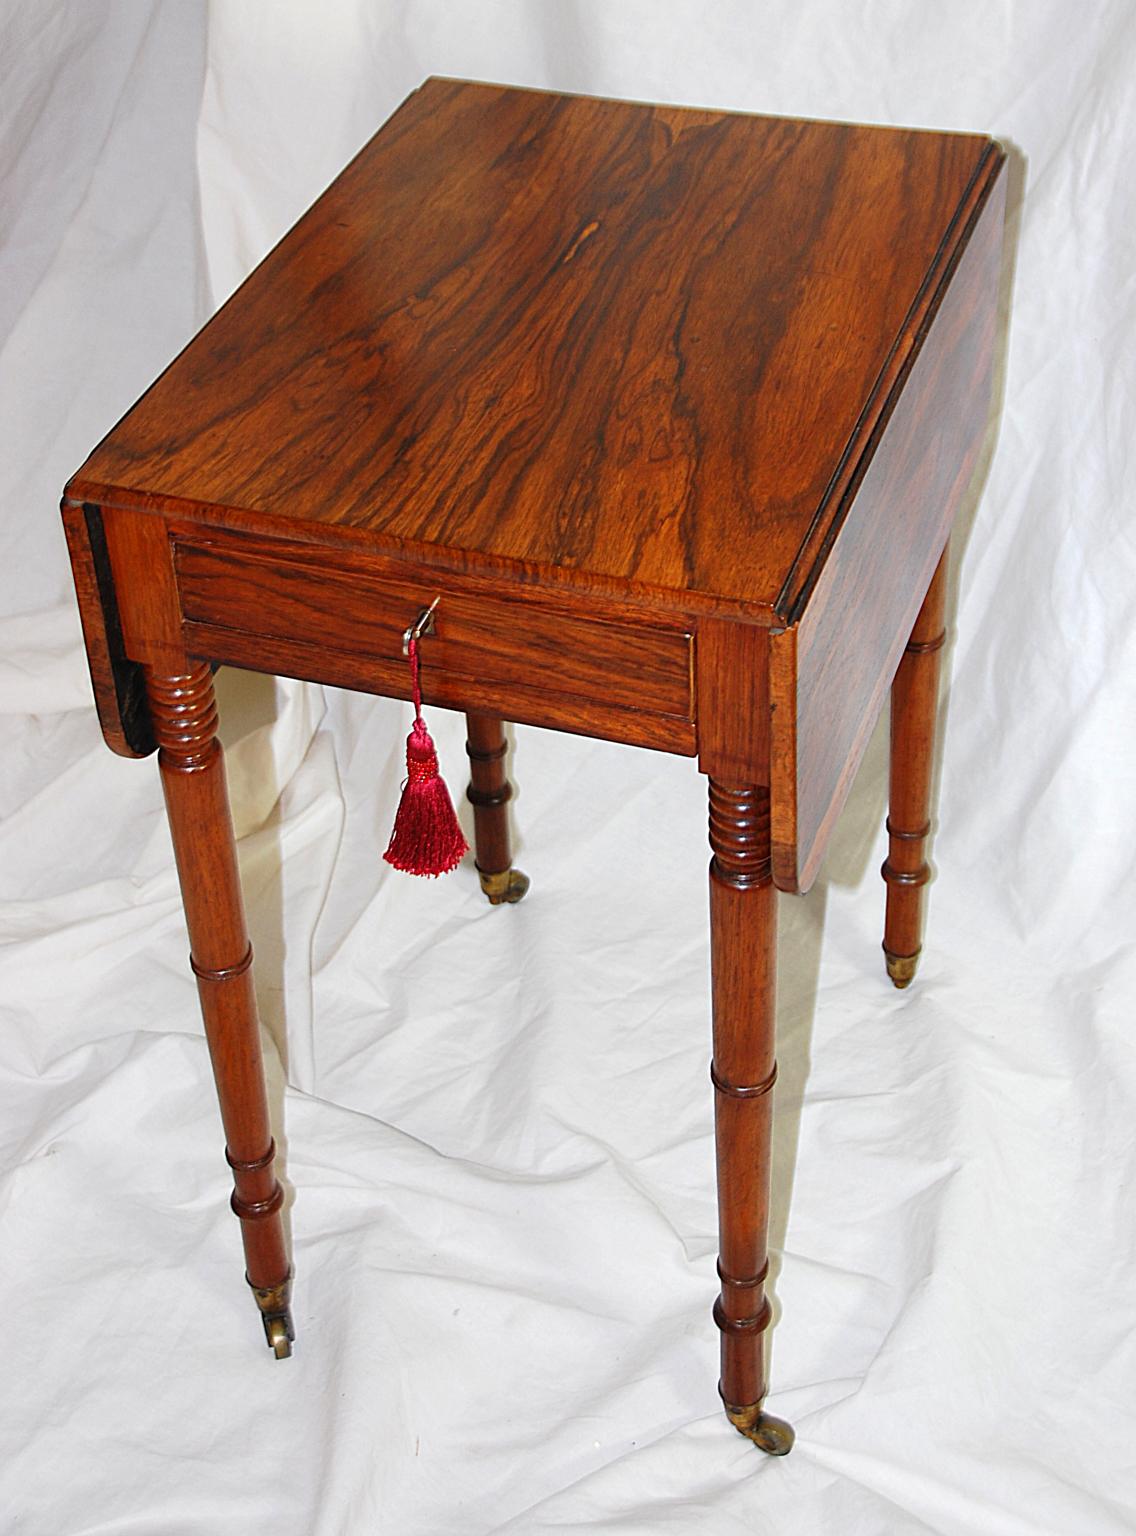 English Regency period rosewood one drawer drop-leaf side table with delicate turned, tapered legs. The sewing basket that originally hung below the drawer has been removed and replaced with a pullout / pull-out leathered slide; the original framing